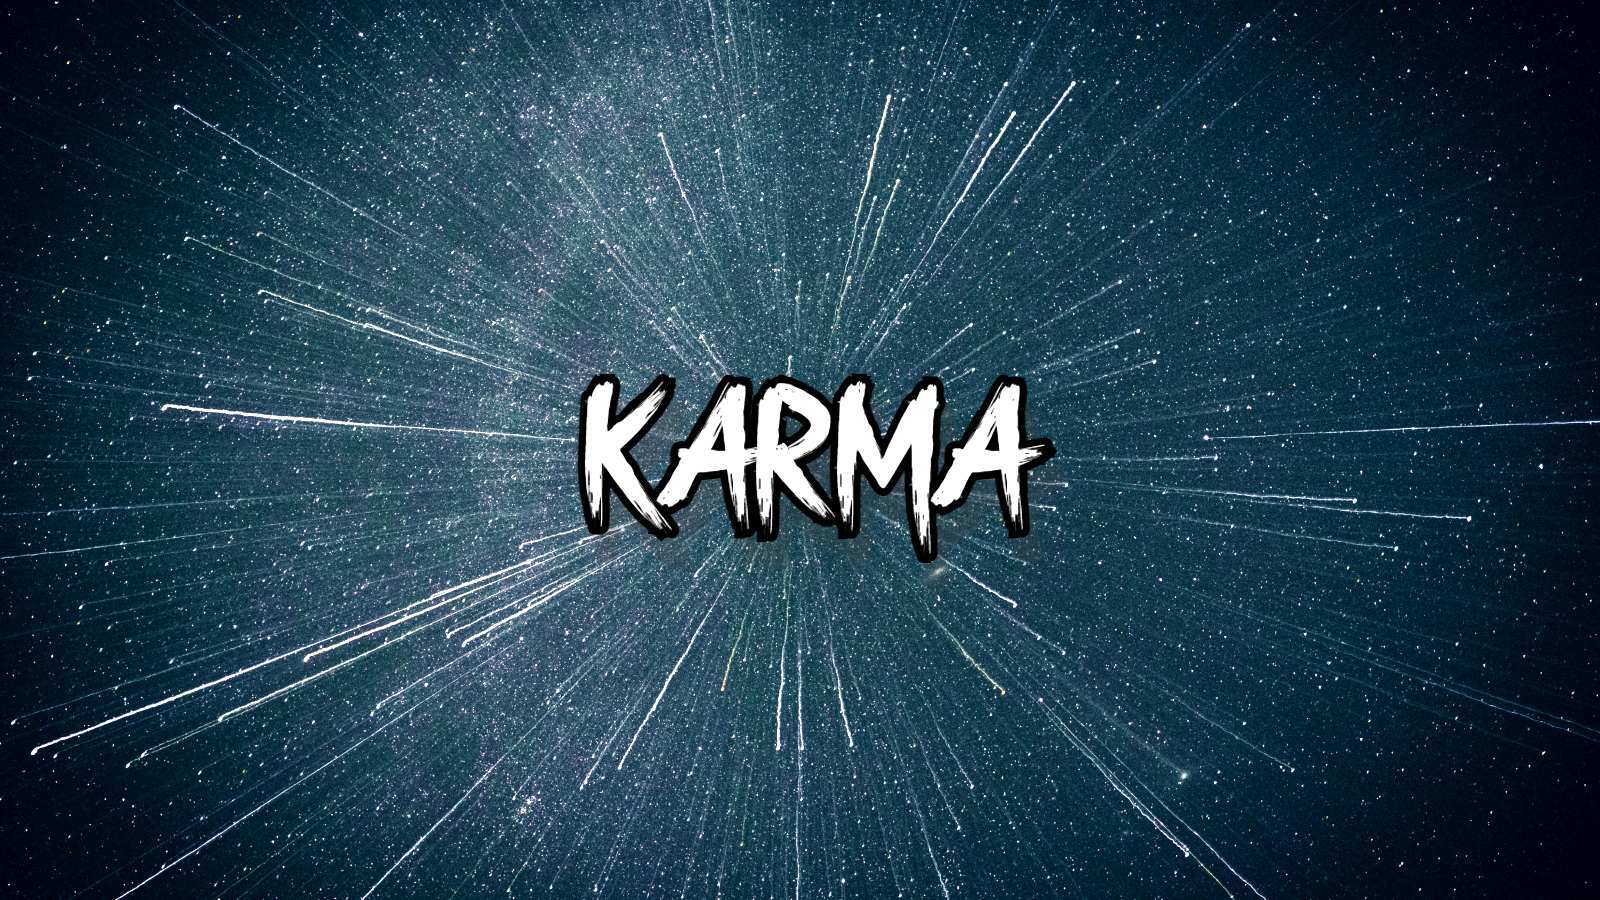 Ultimate Collection of 999+ Karma Images – Incredible Full 4K Karma Images